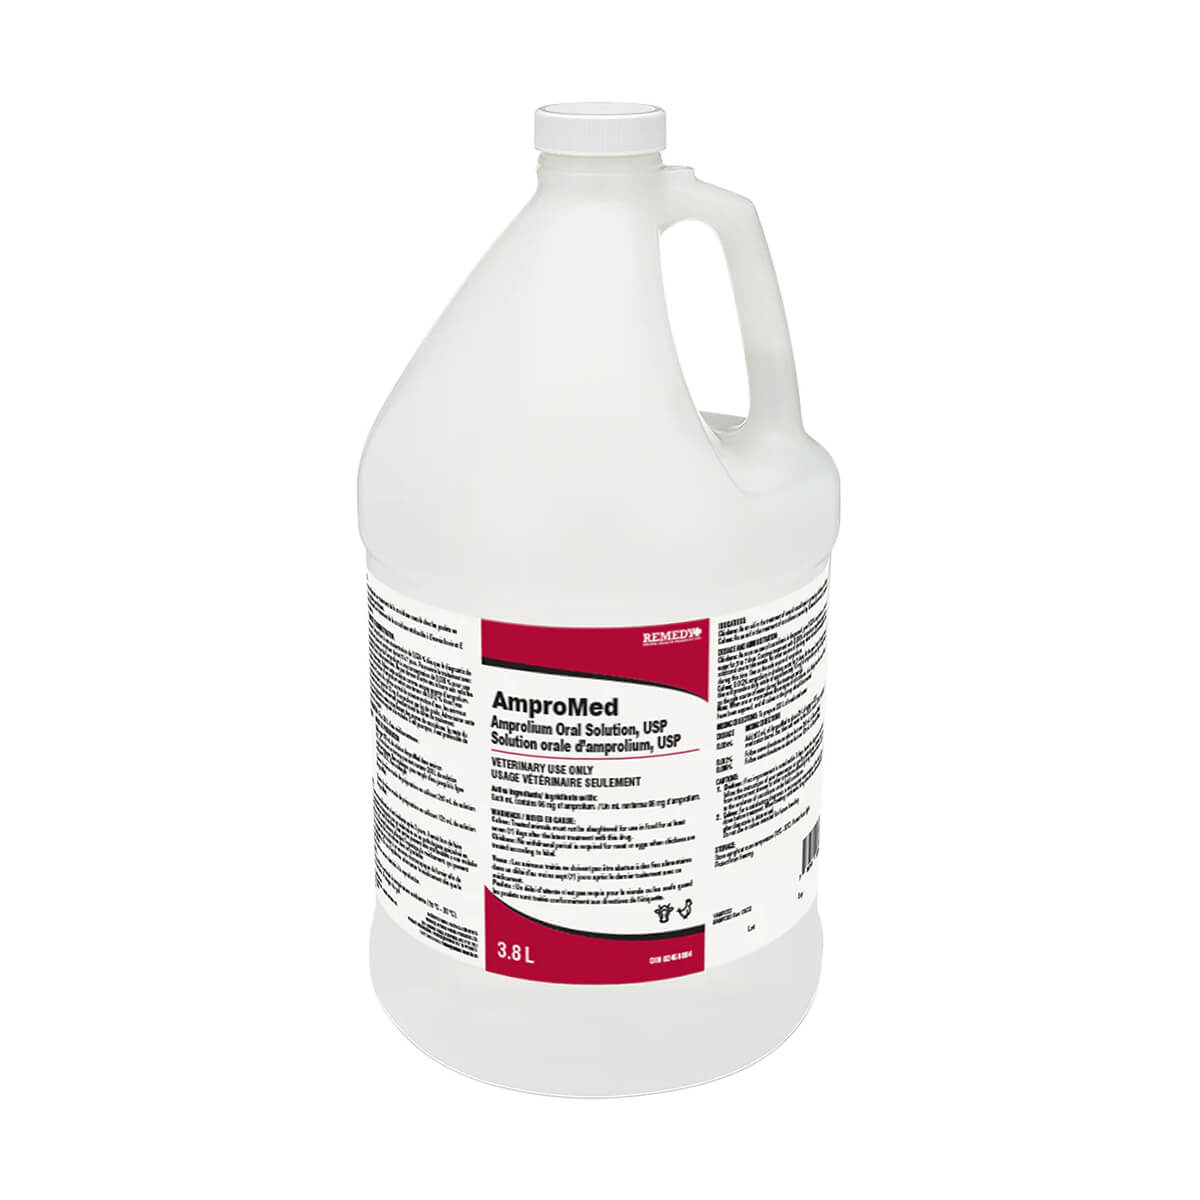 AmproMed Oral Solution for Calves and Chickens - 3.8 L